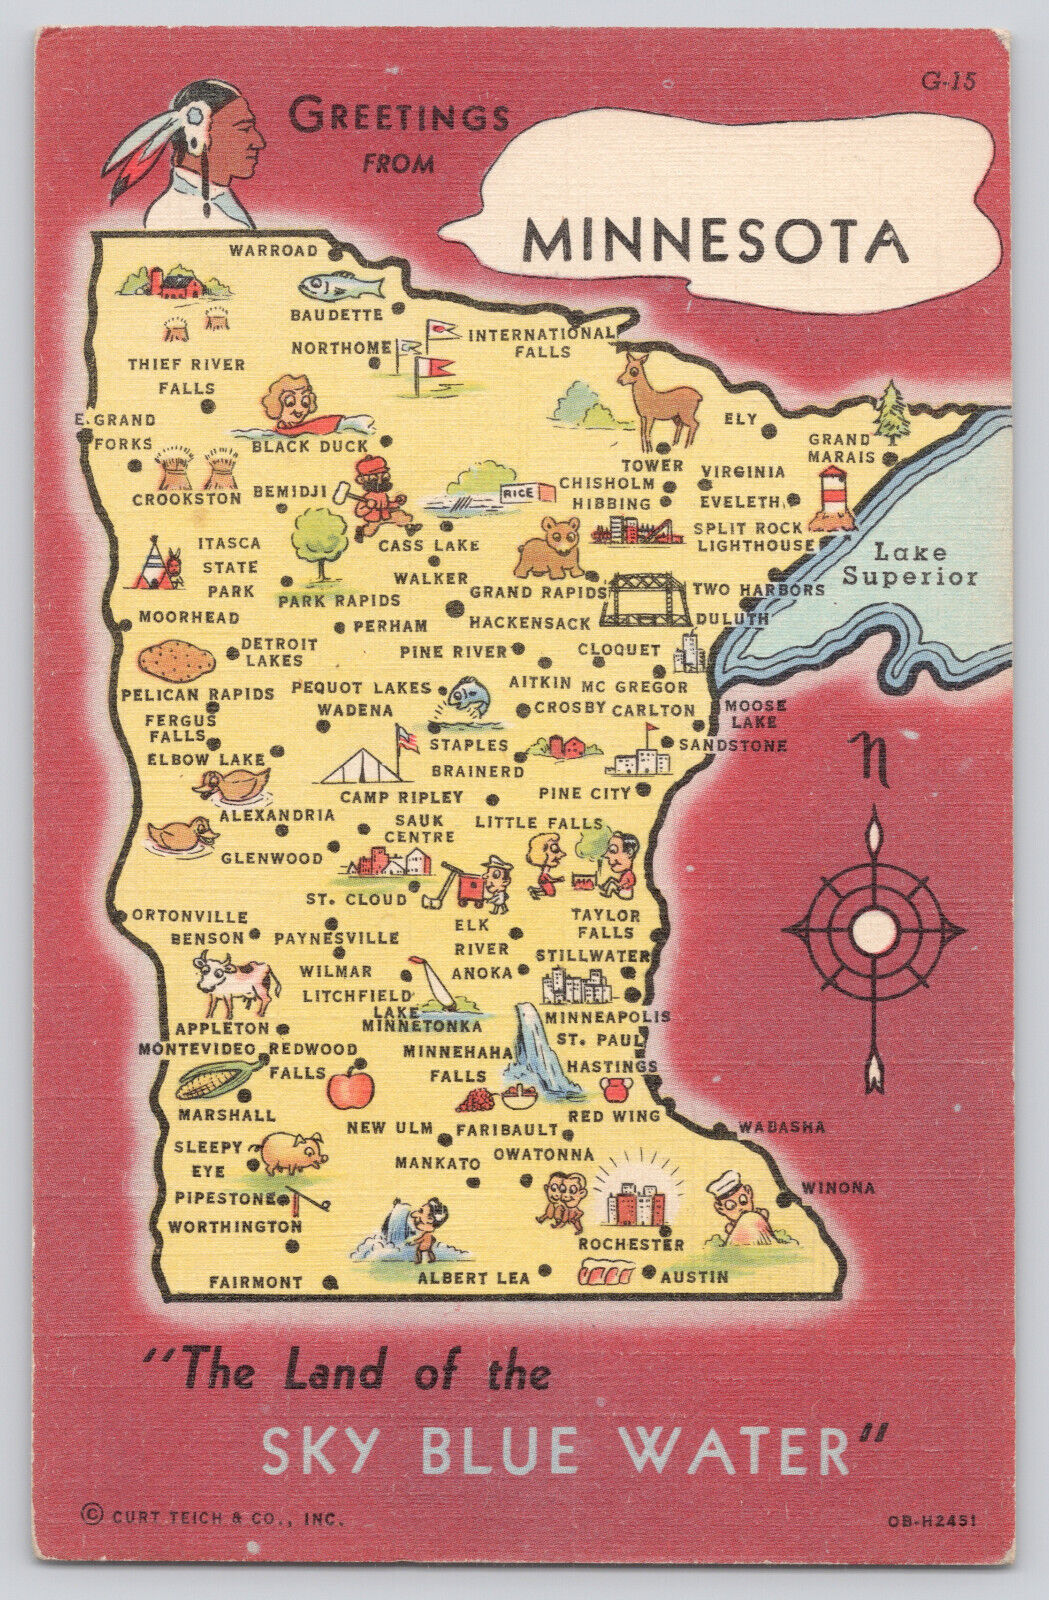 Greetings from Minnesota State Map Vintage Postcard C1940